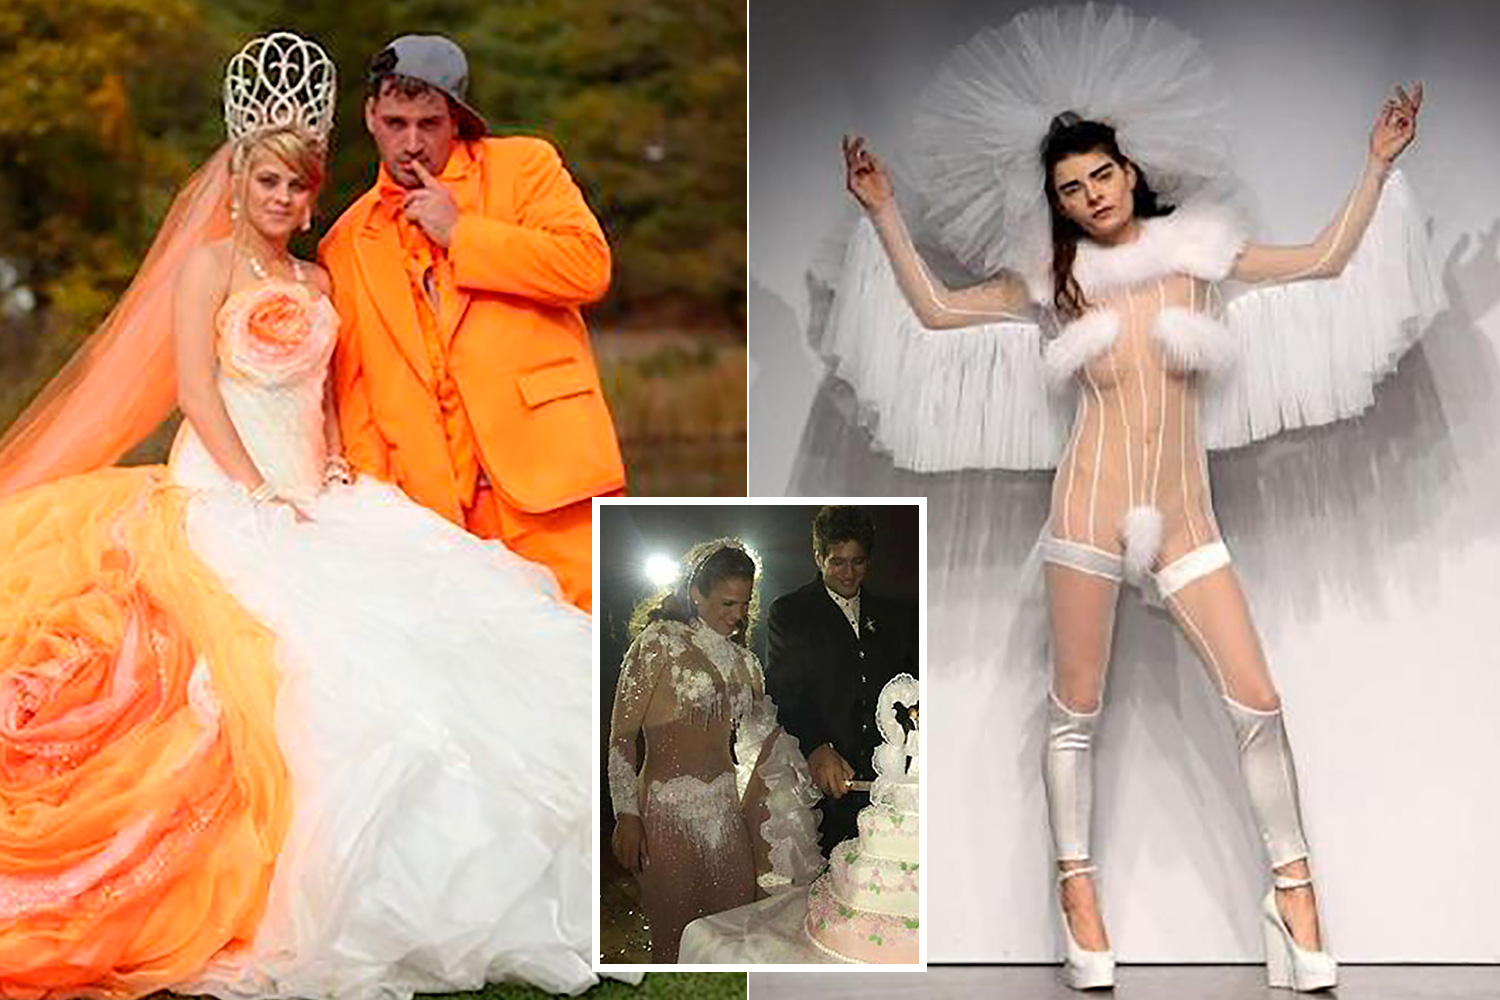 charity davis recommends Brides Dressed Undressed